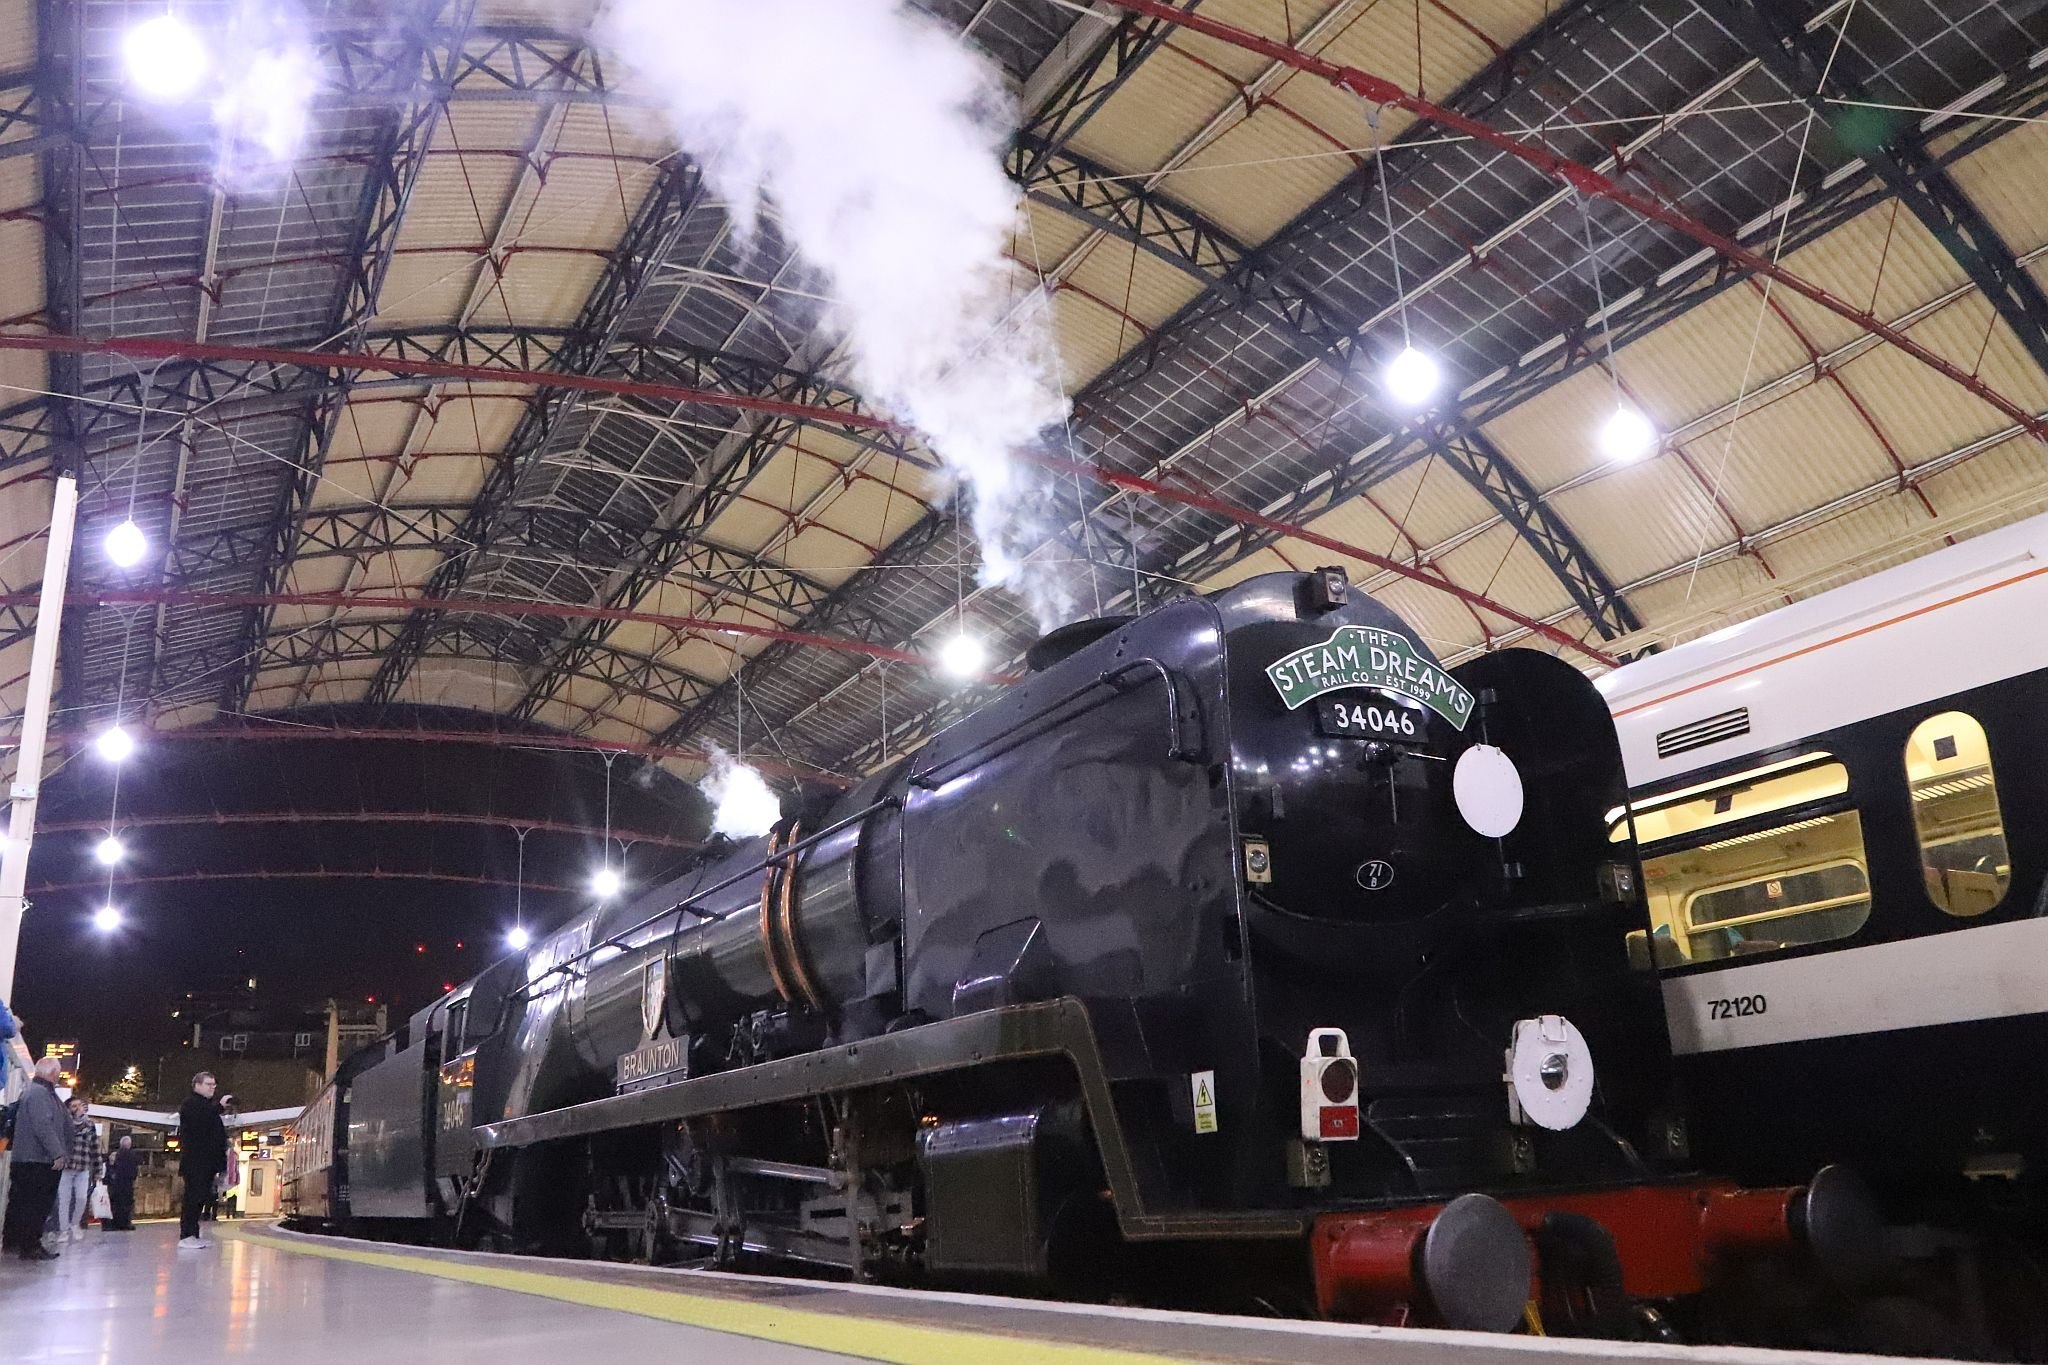 Southern Railway West Country class steam railway engine 34046 "Braunton" at platform 2 of London Victoria railway station on the night of Saturday 22nd April 2023, having worked the Steam Dreams special to Winchester and back.